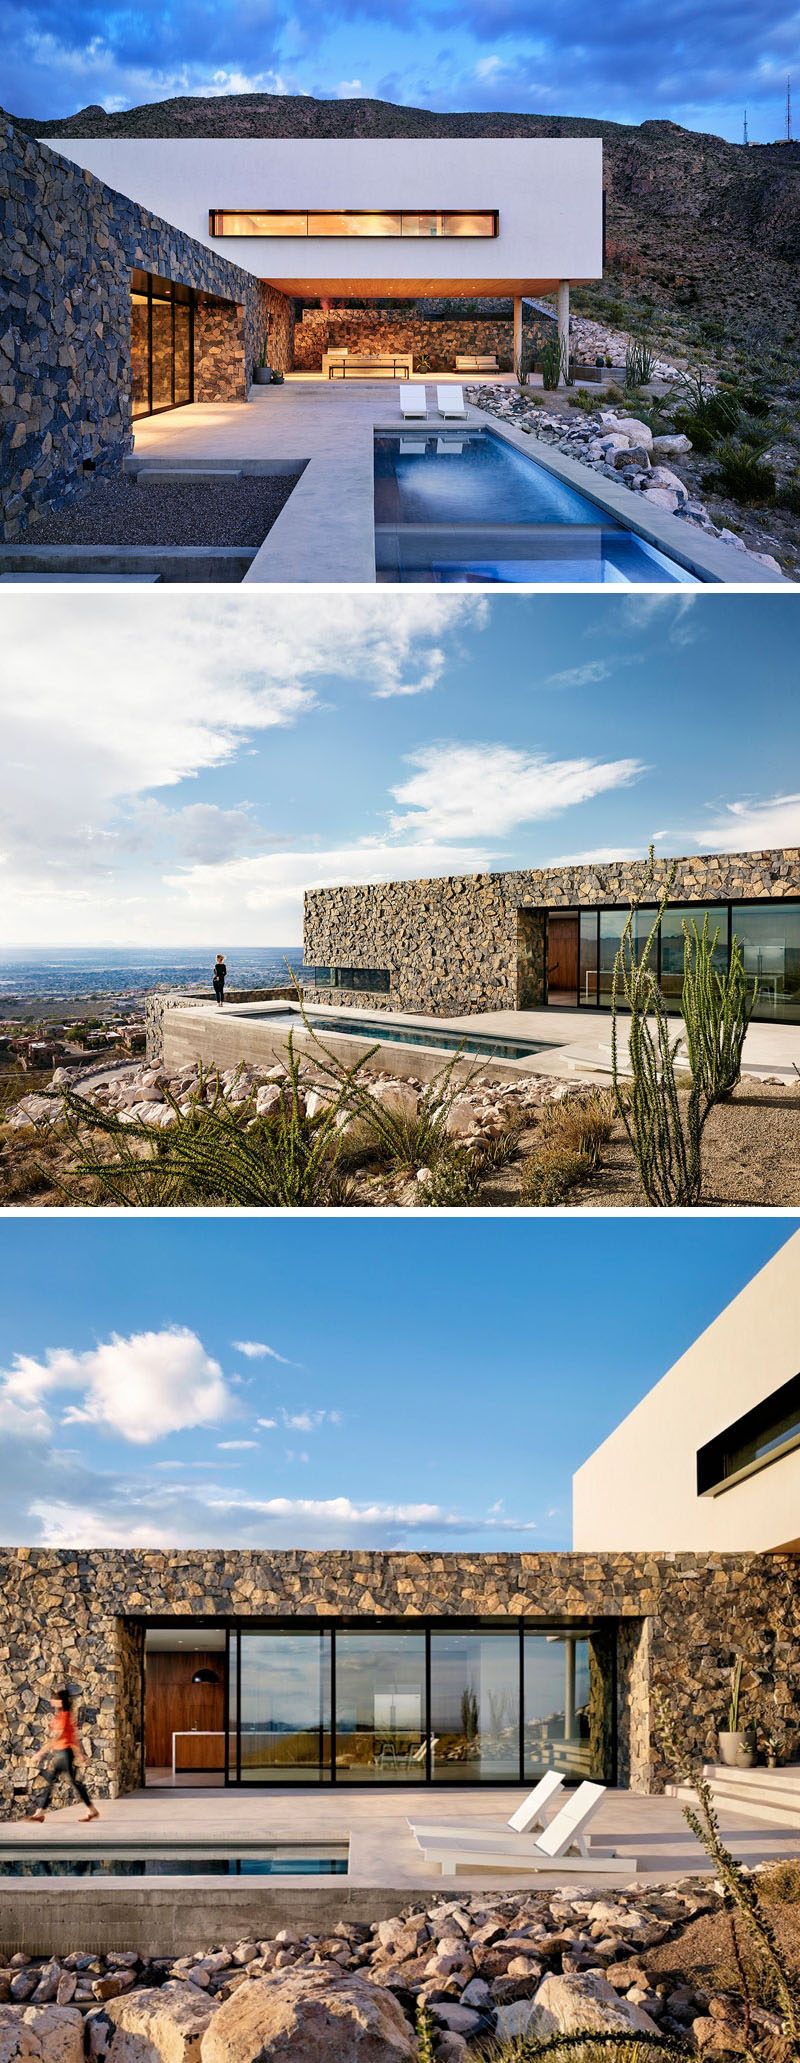 The design of this modern house has a covered entertaining space, sheltered by the white volume of the level above it, as well as a pool and lounge deck that leads directly into the kitchen. The main level is covered in stone that helps the majority of the house blend into the rugged mountain landscape around it.